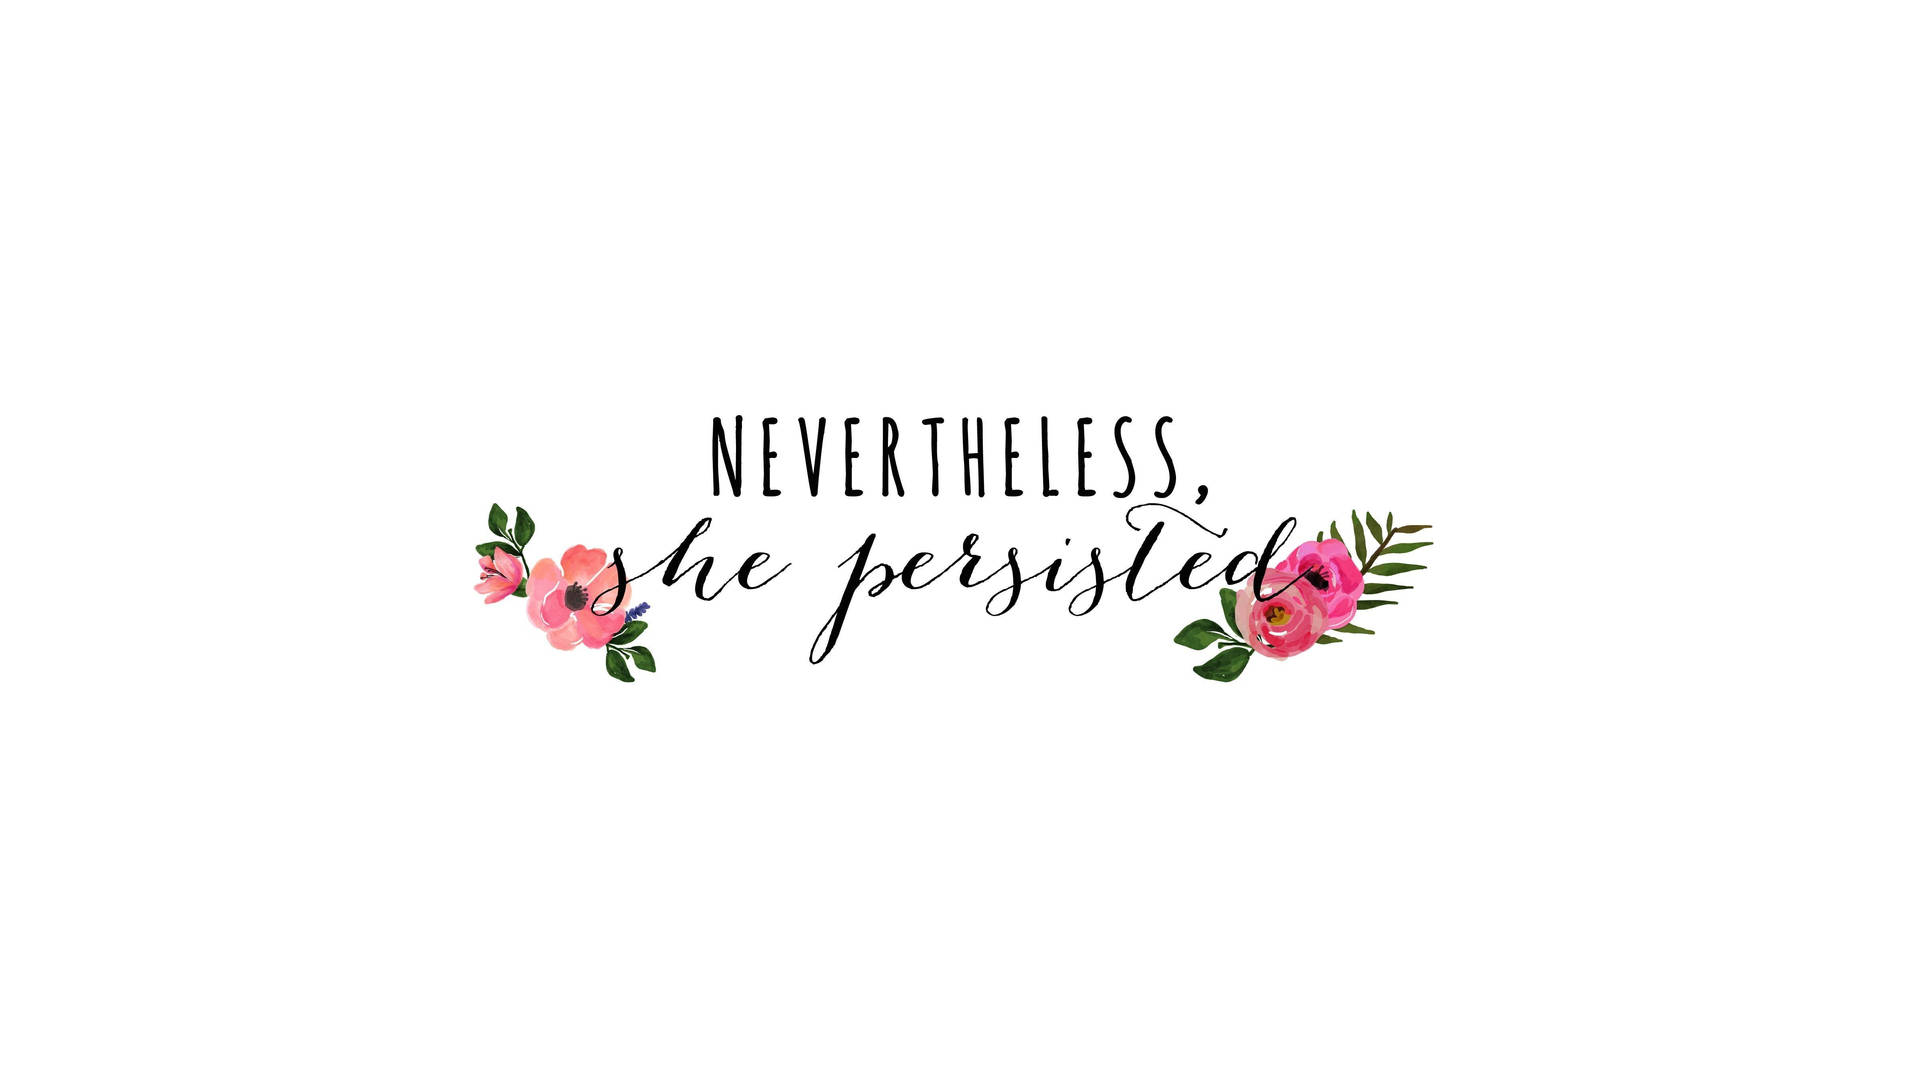 Persistence Motivational Quotes Aesthetic Wallpaper